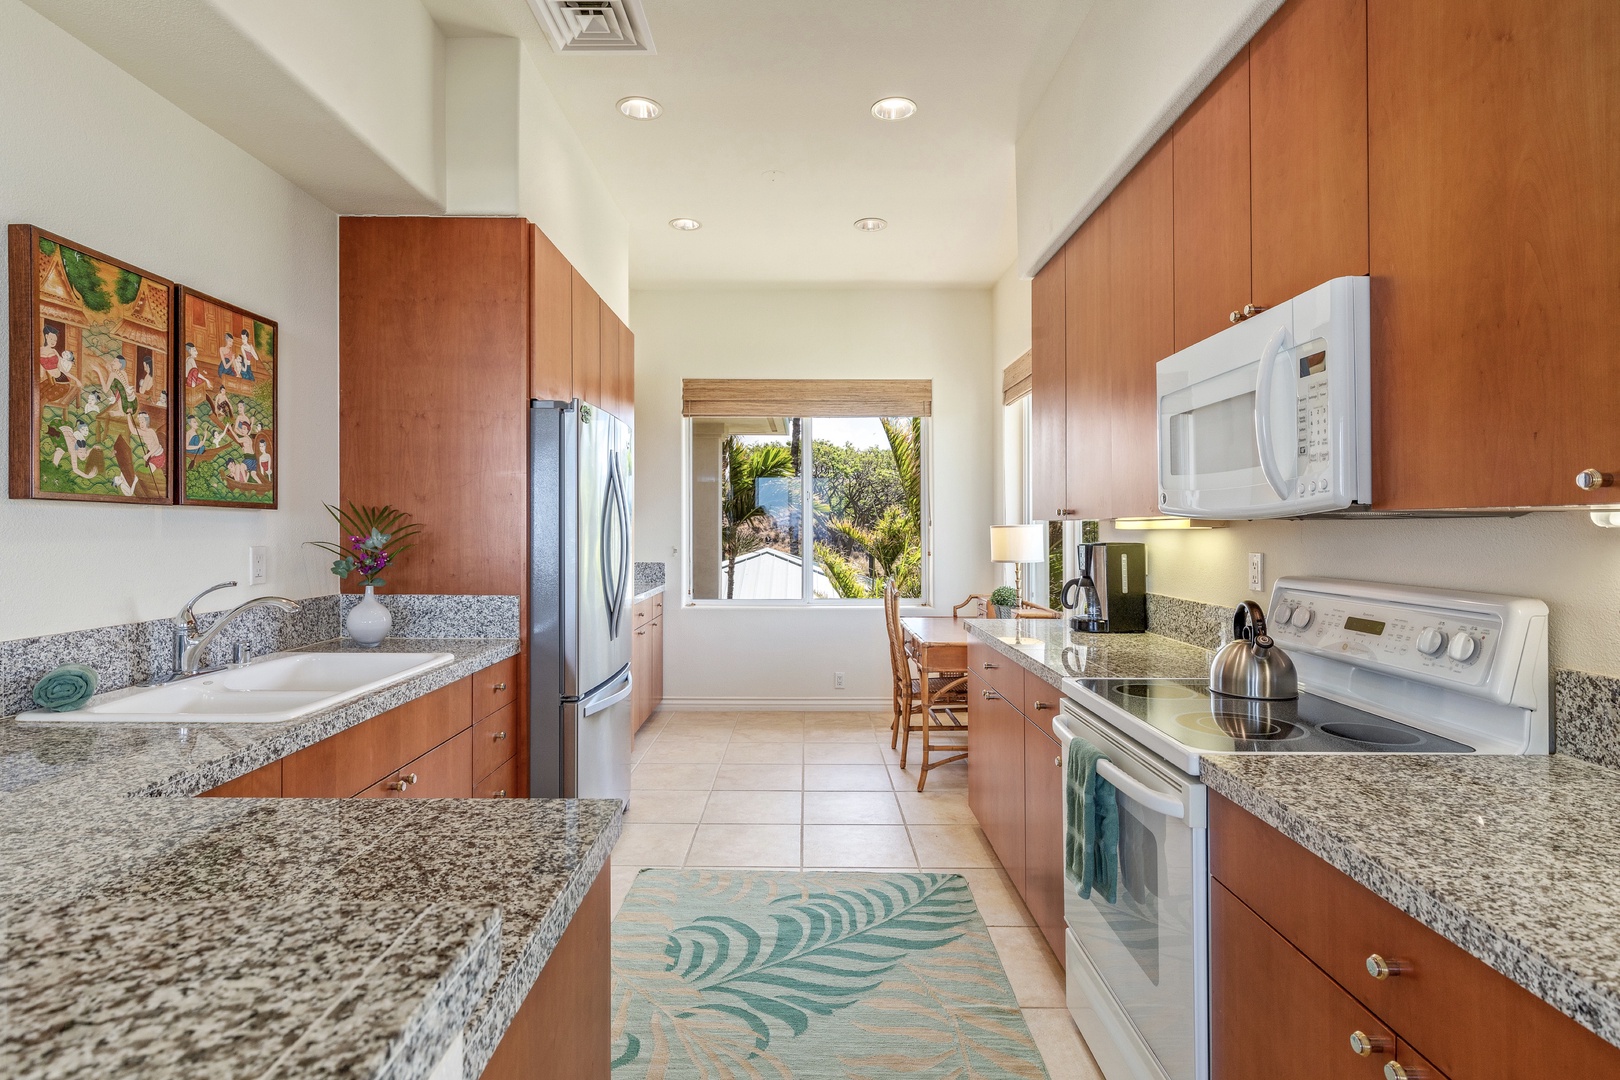 Kamuela Vacation Rentals, 2BD Kumulani (I-4) at Mauna Kea Resort - Ample counter space and cabinets in the fully equipped kitchen.